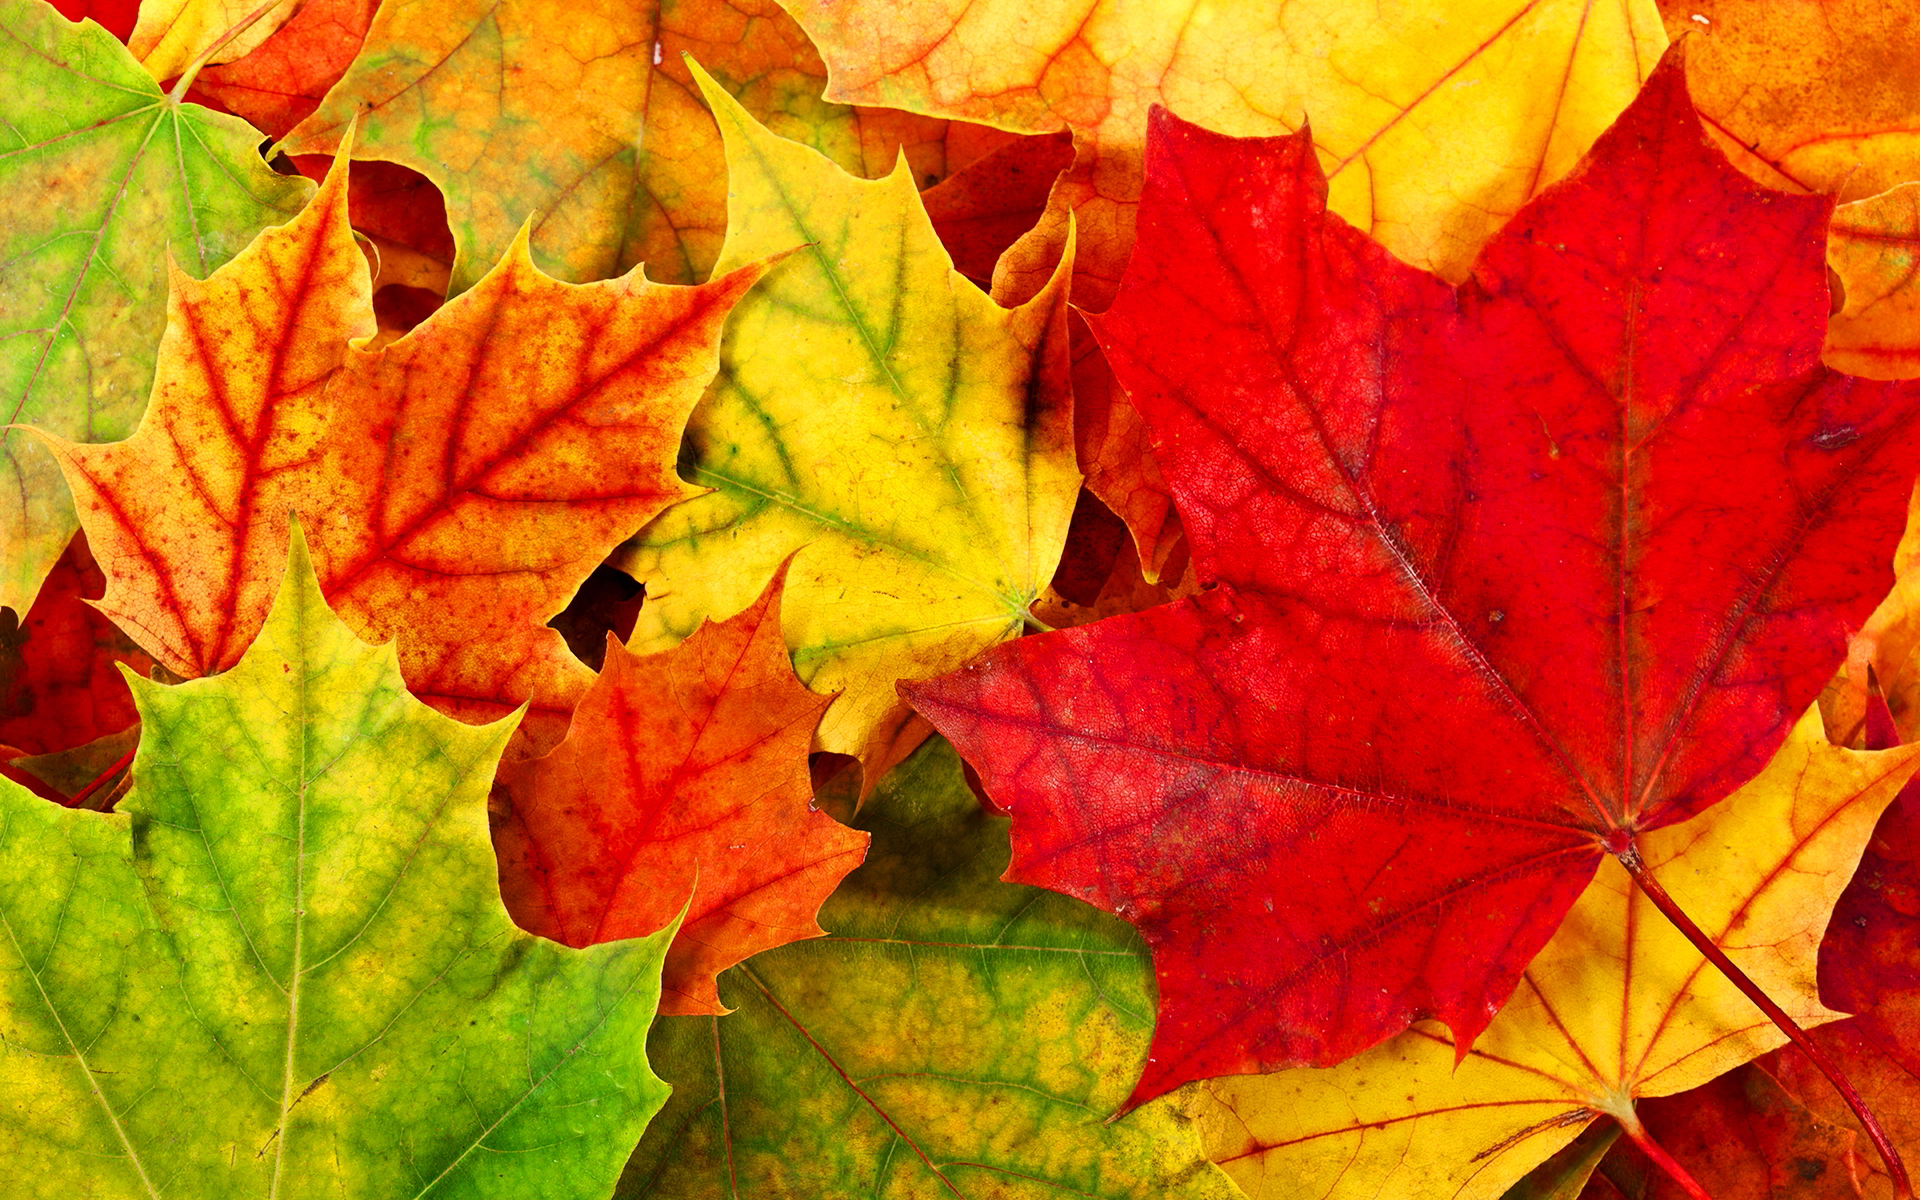 Colorful autumn leaves wallpaper | 1920x1200 | #29733